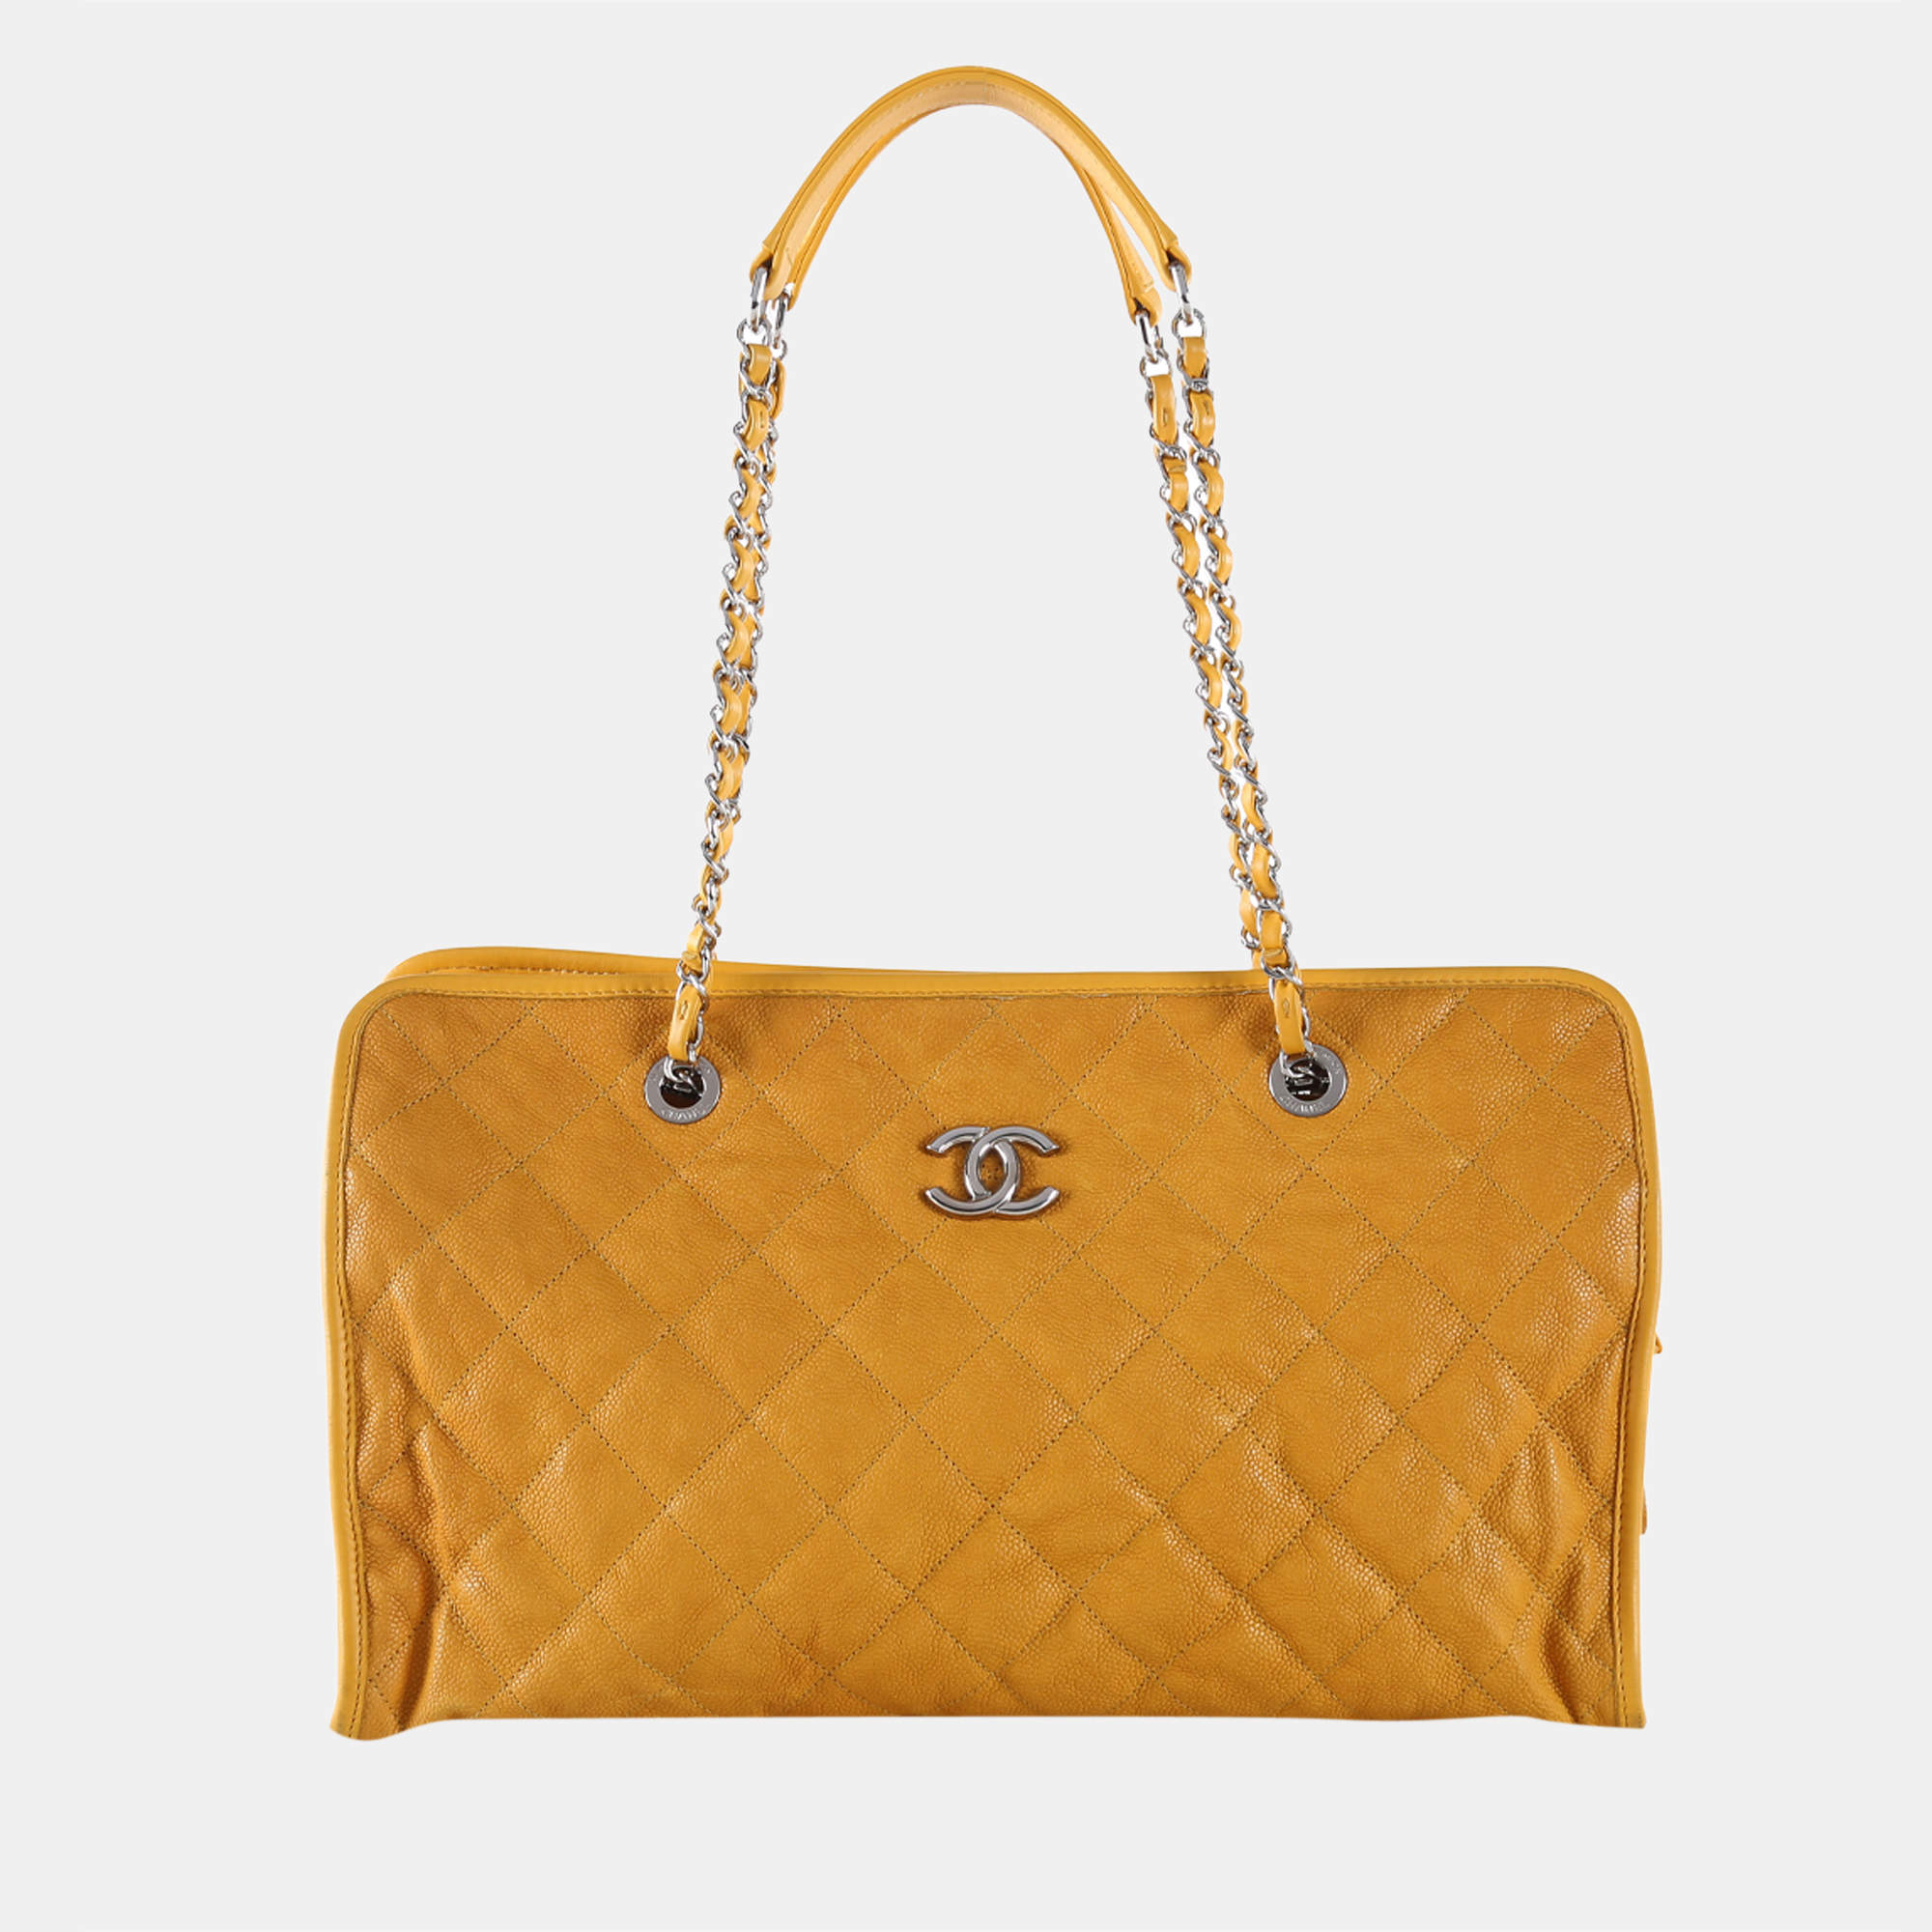 Chanel Yellow Caviar Leather French Riviera Large Tote Bag Chanel